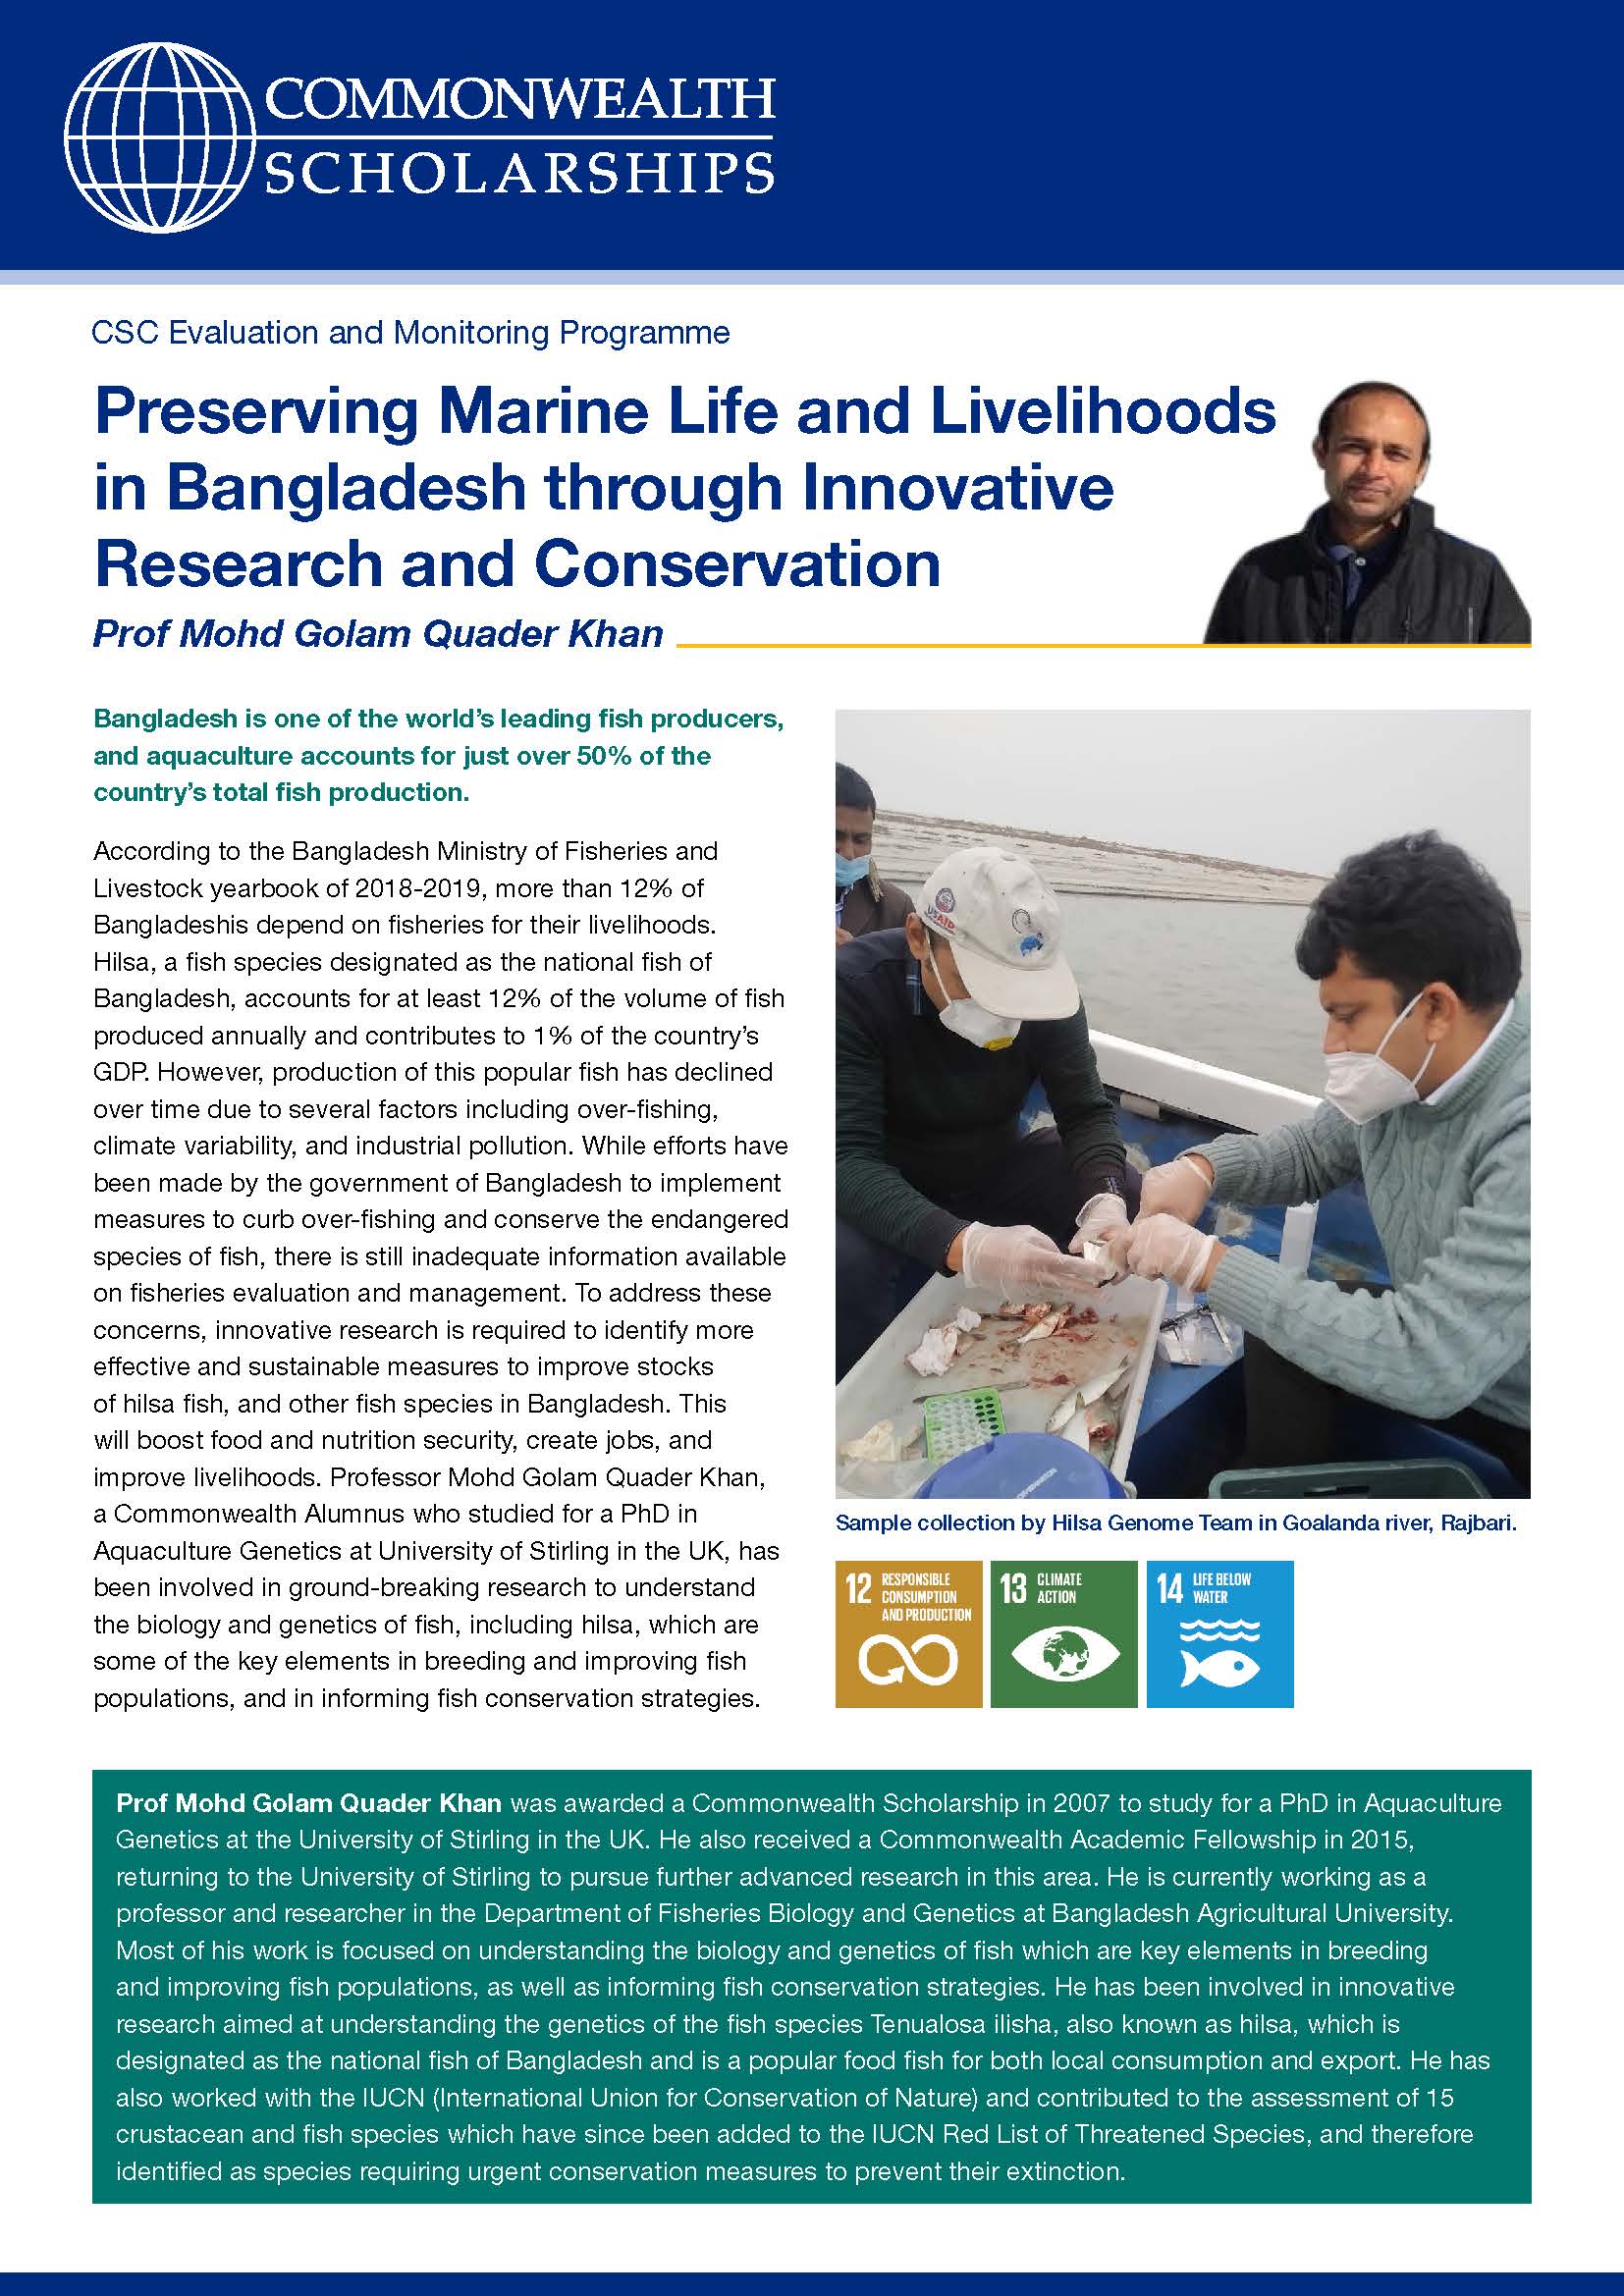 Read the Preserving Marine Life and Livelihoods in Bangladesh through Innovative Research and Conservation case study